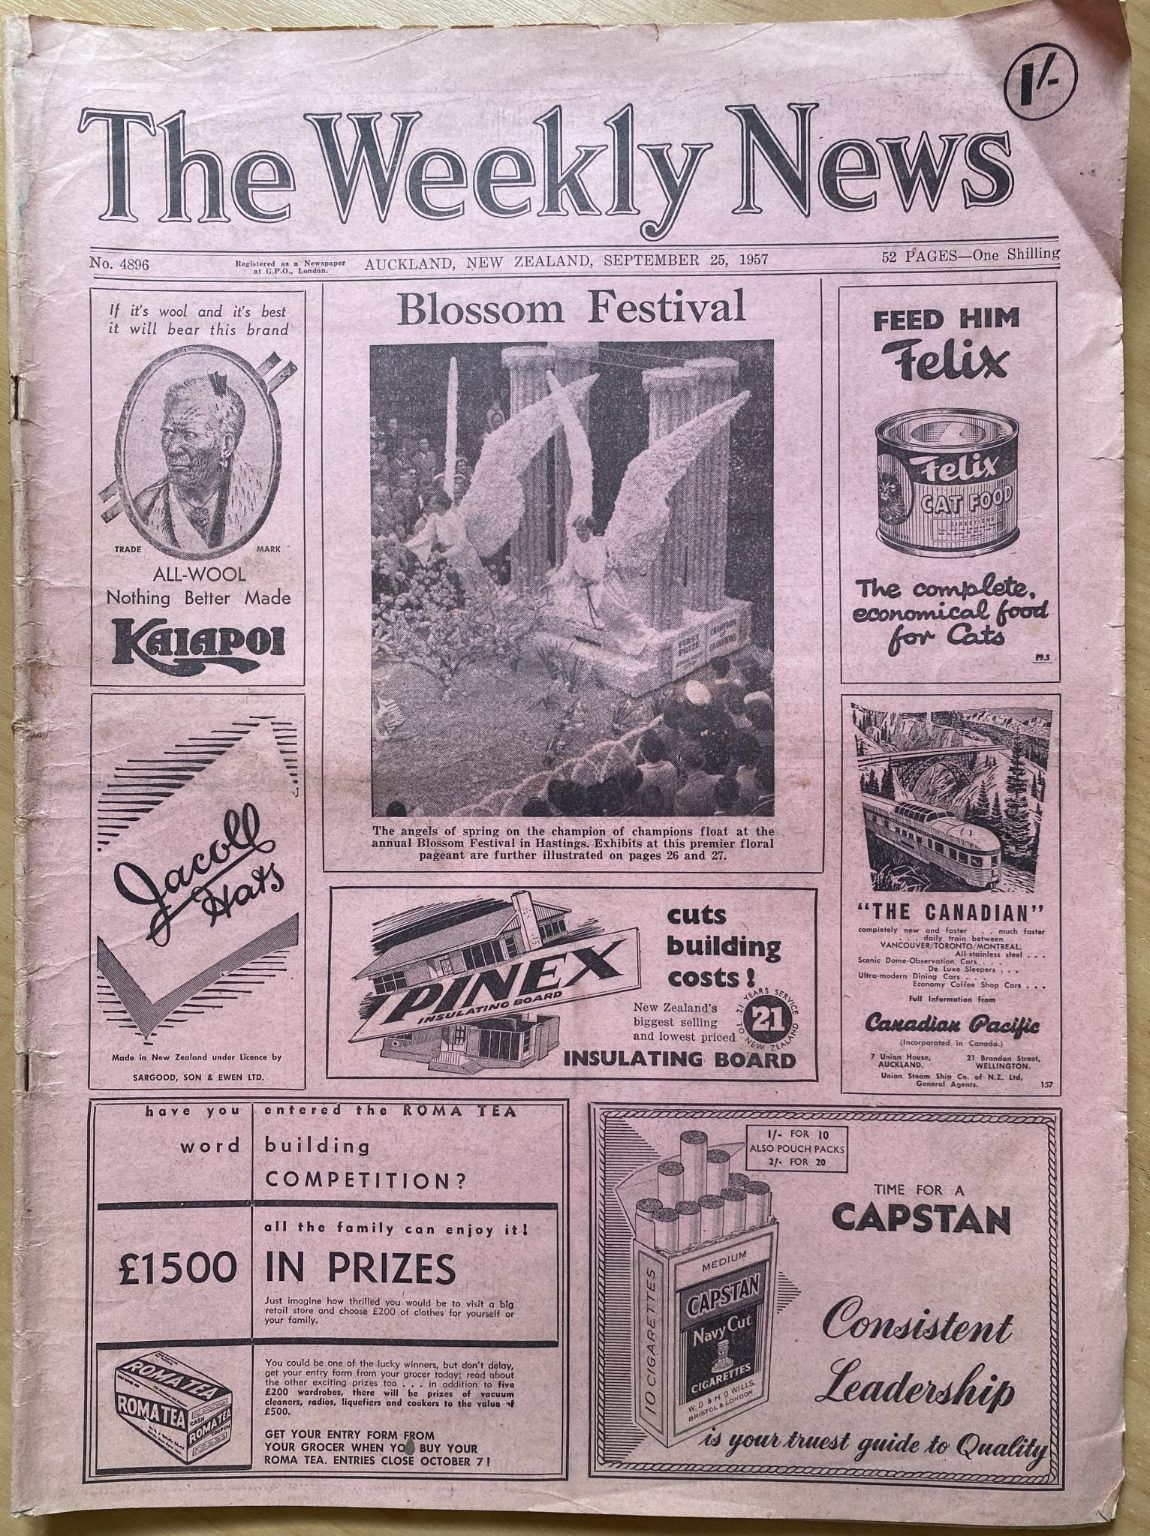 OLD NEWSPAPER: The Weekly News, No. 4896, 25 September 1957